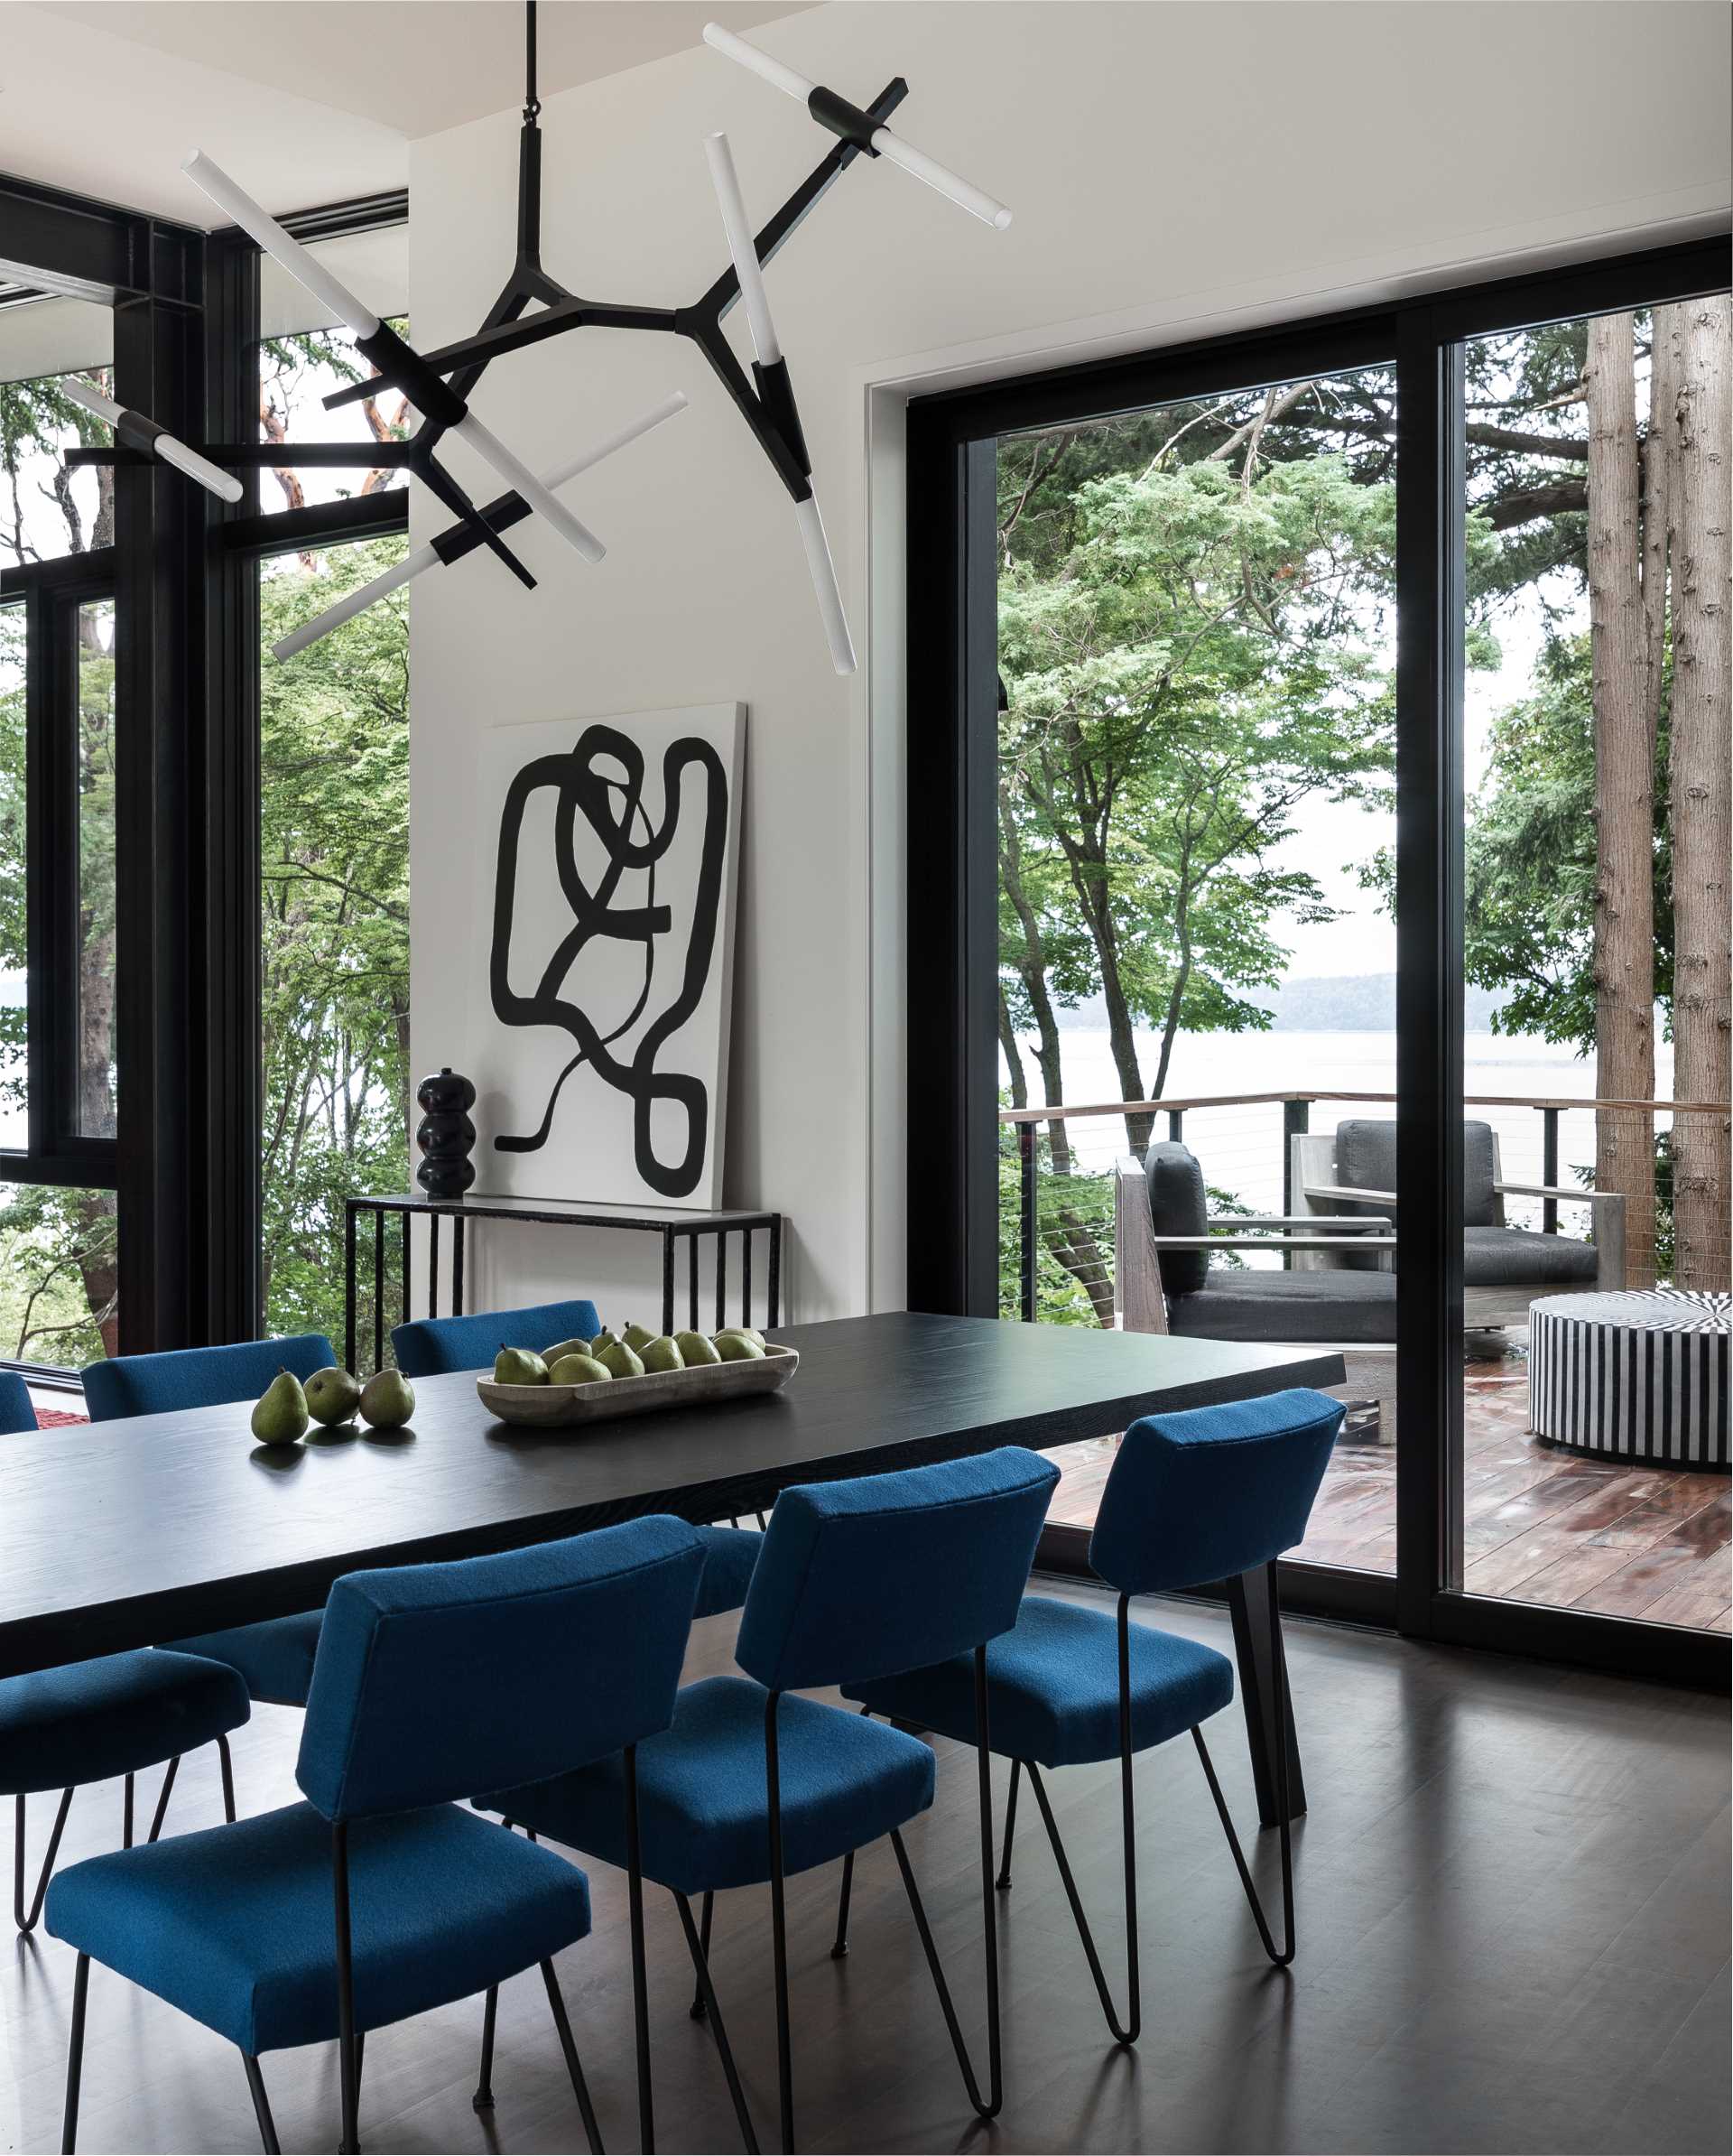 In this contemporary dining room, a sculptural light hangs above the long dining table, while the blue dining chairs complement the furniture found in the living room.